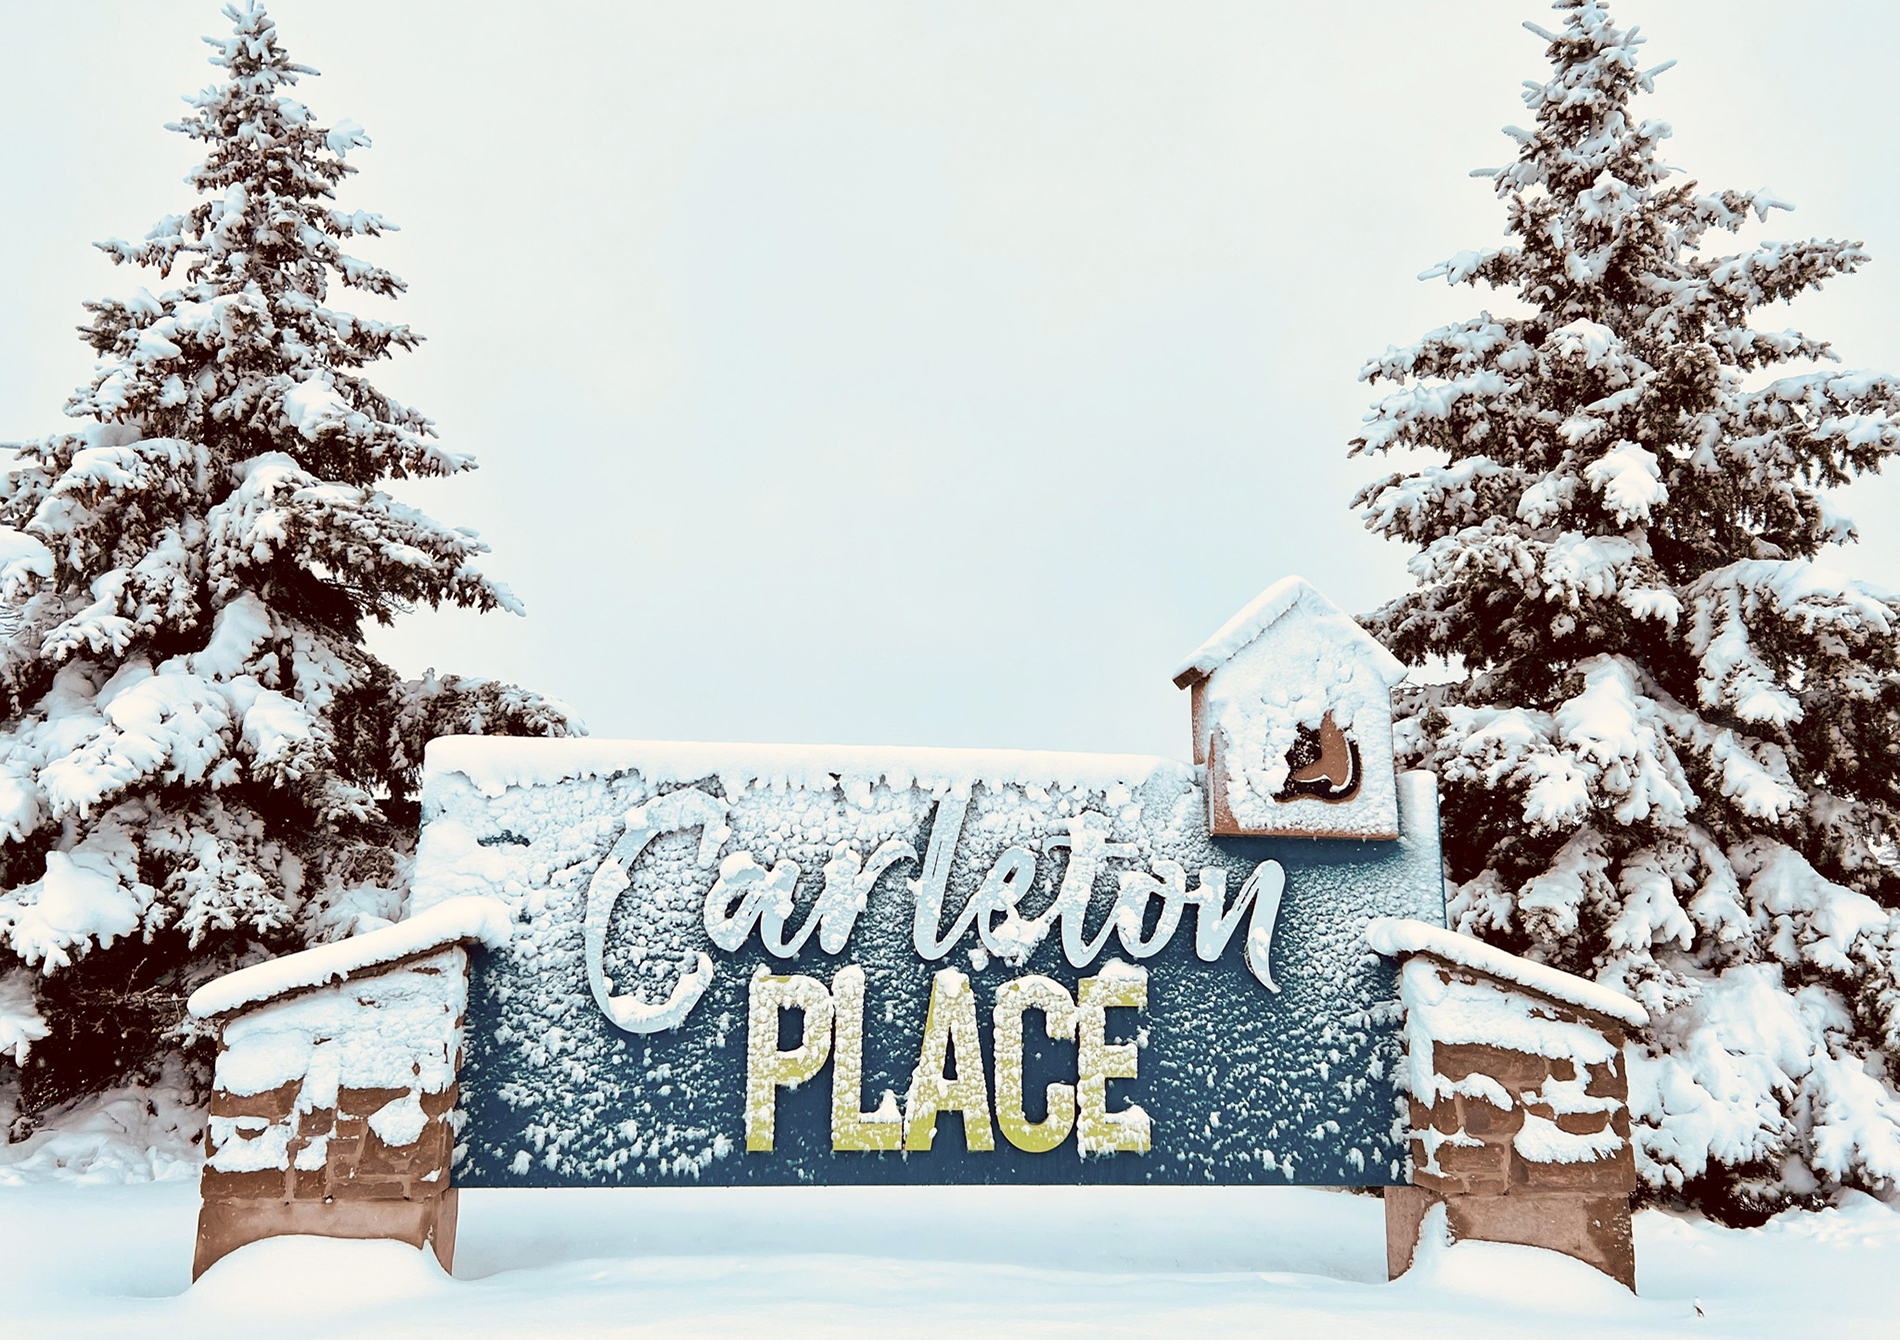 Image of the Carleton Place Entrance sign covered with snow with trees on either side